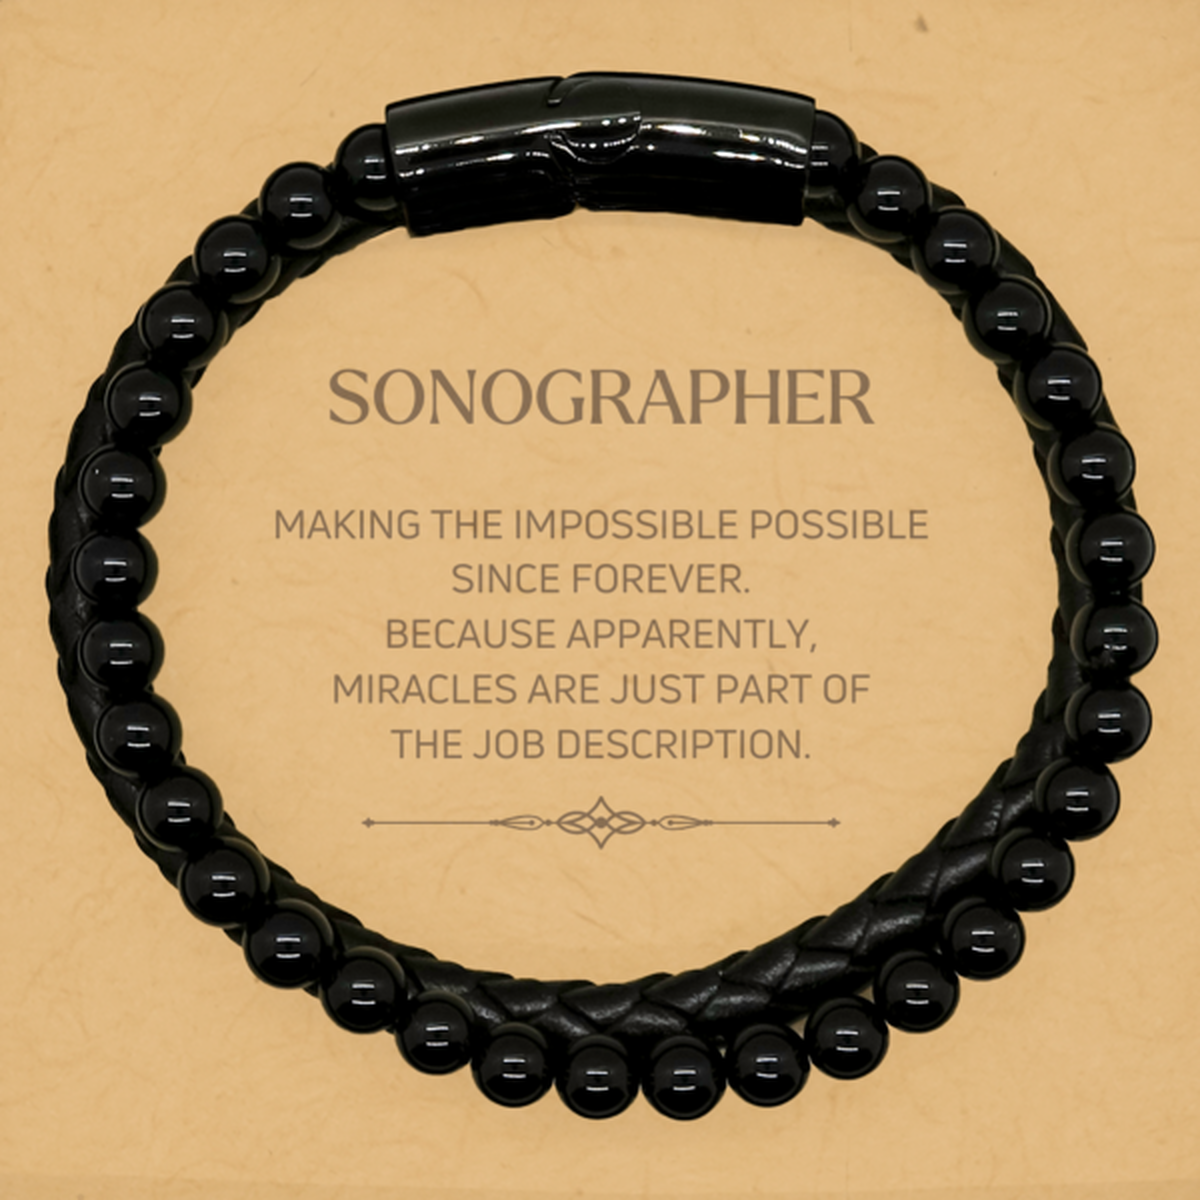 Funny Sonographer Gifts, Miracles are just part of the job description, Inspirational Birthday Stone Leather Bracelets For Sonographer, Men, Women, Coworkers, Friends, Boss